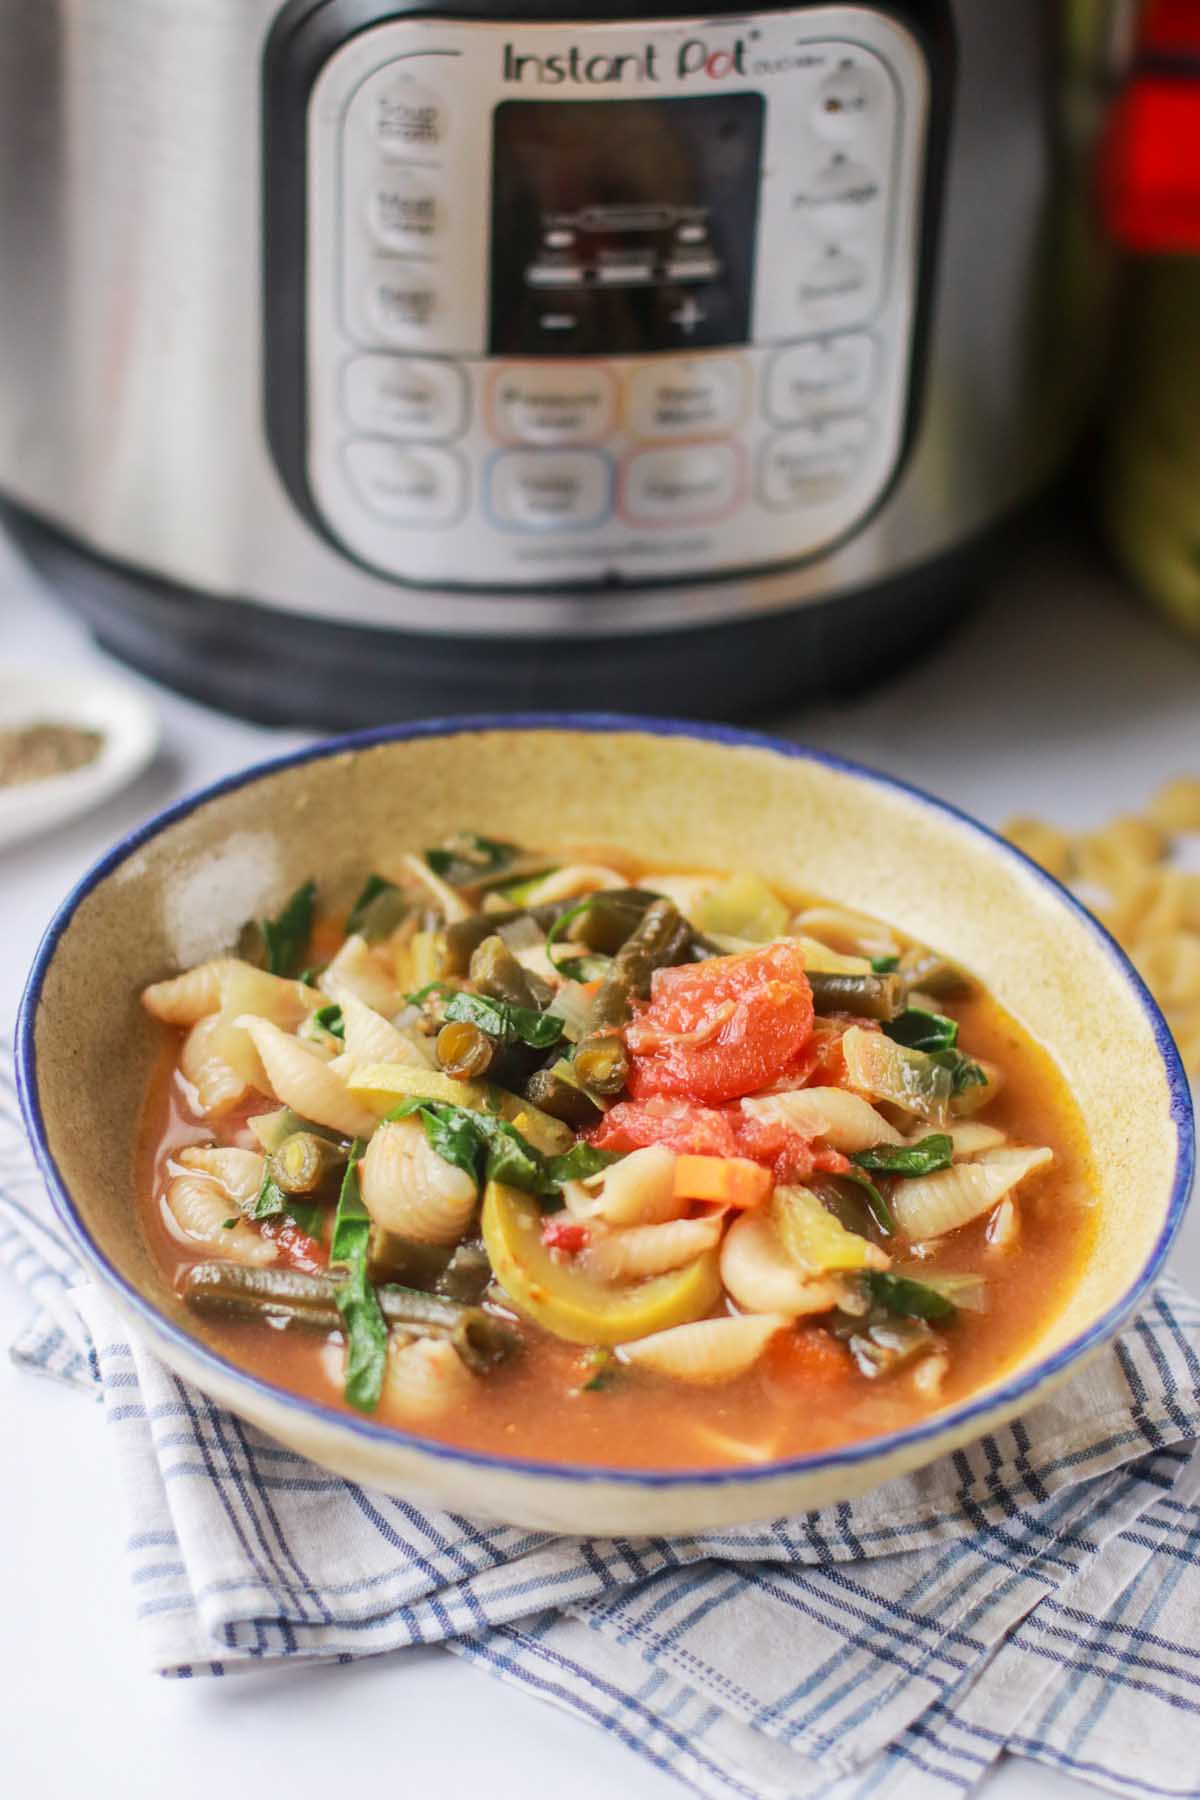 vegetable soup on a bowl in front of the Instant Pot.